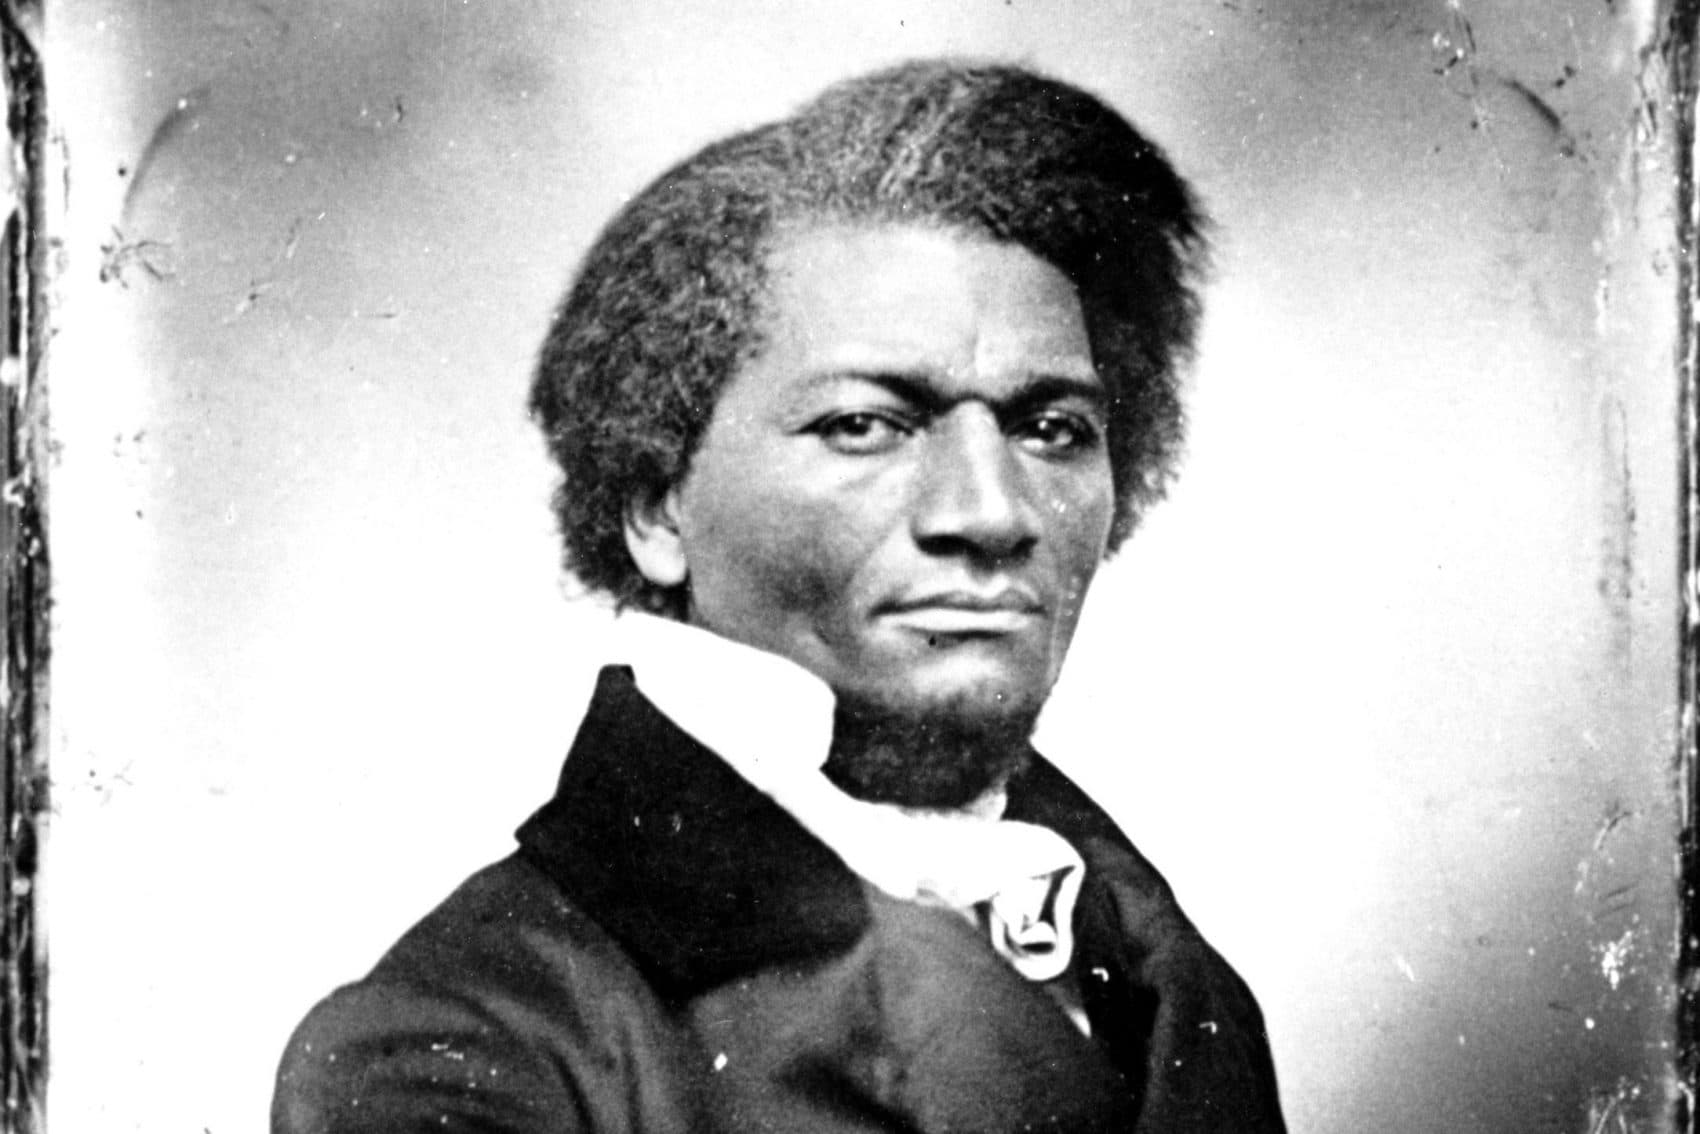 Buy Frederick douglass prophet of freedom sparknotes No Survey